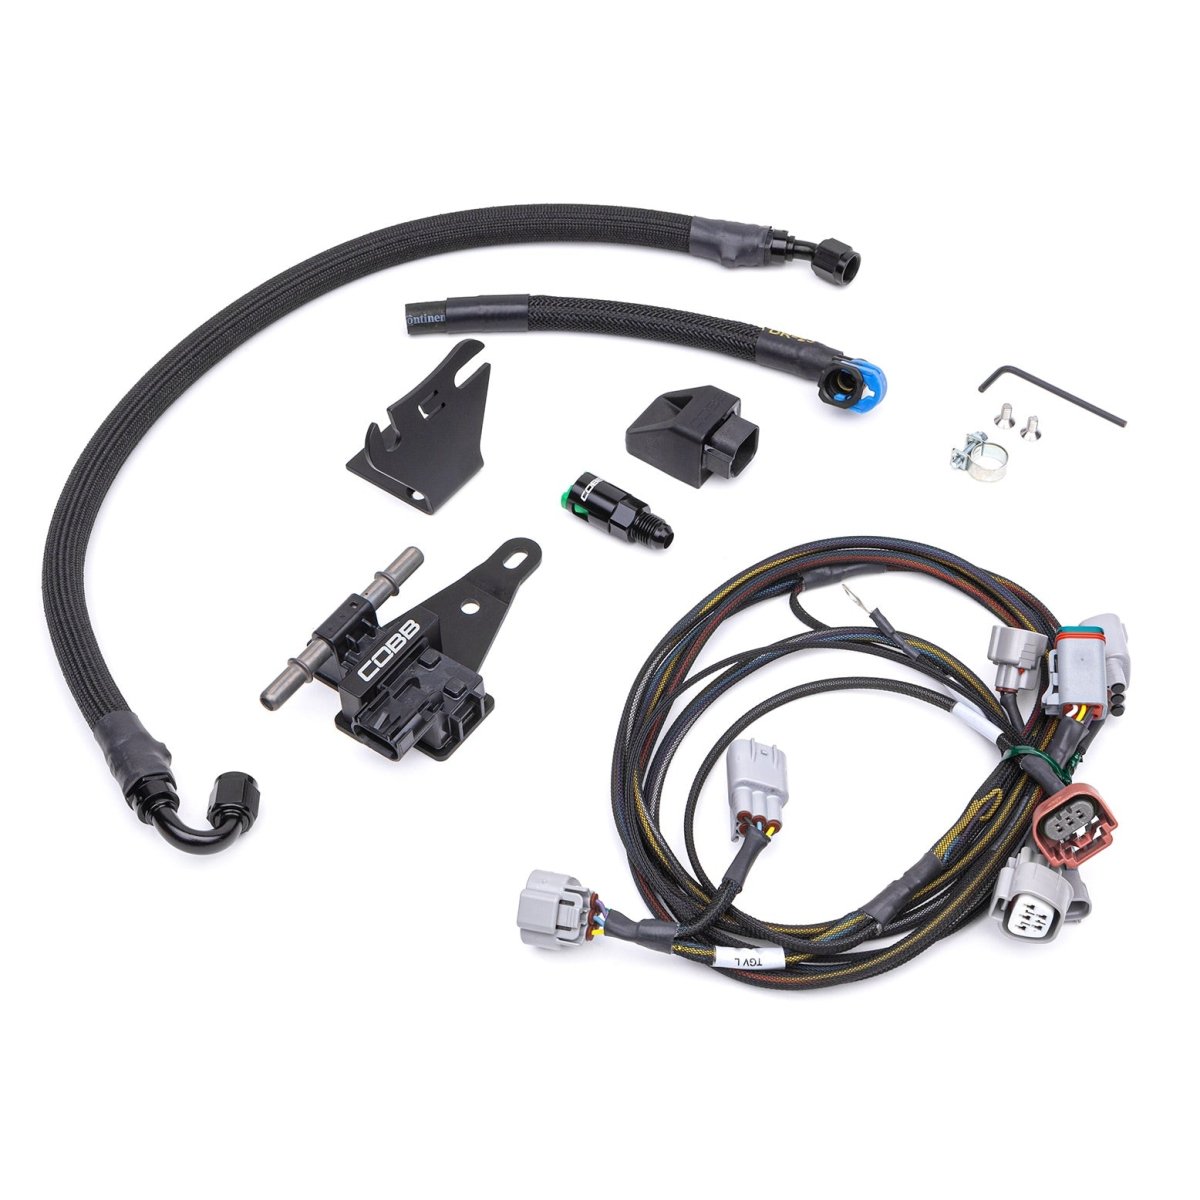 COBB 15-18 STI NexGen Stage 1 to Stage 2 + Flex Fuel Power Package Upgrade w/ Blue Intake | SUB004NG2S1FF-S1-UP-BL